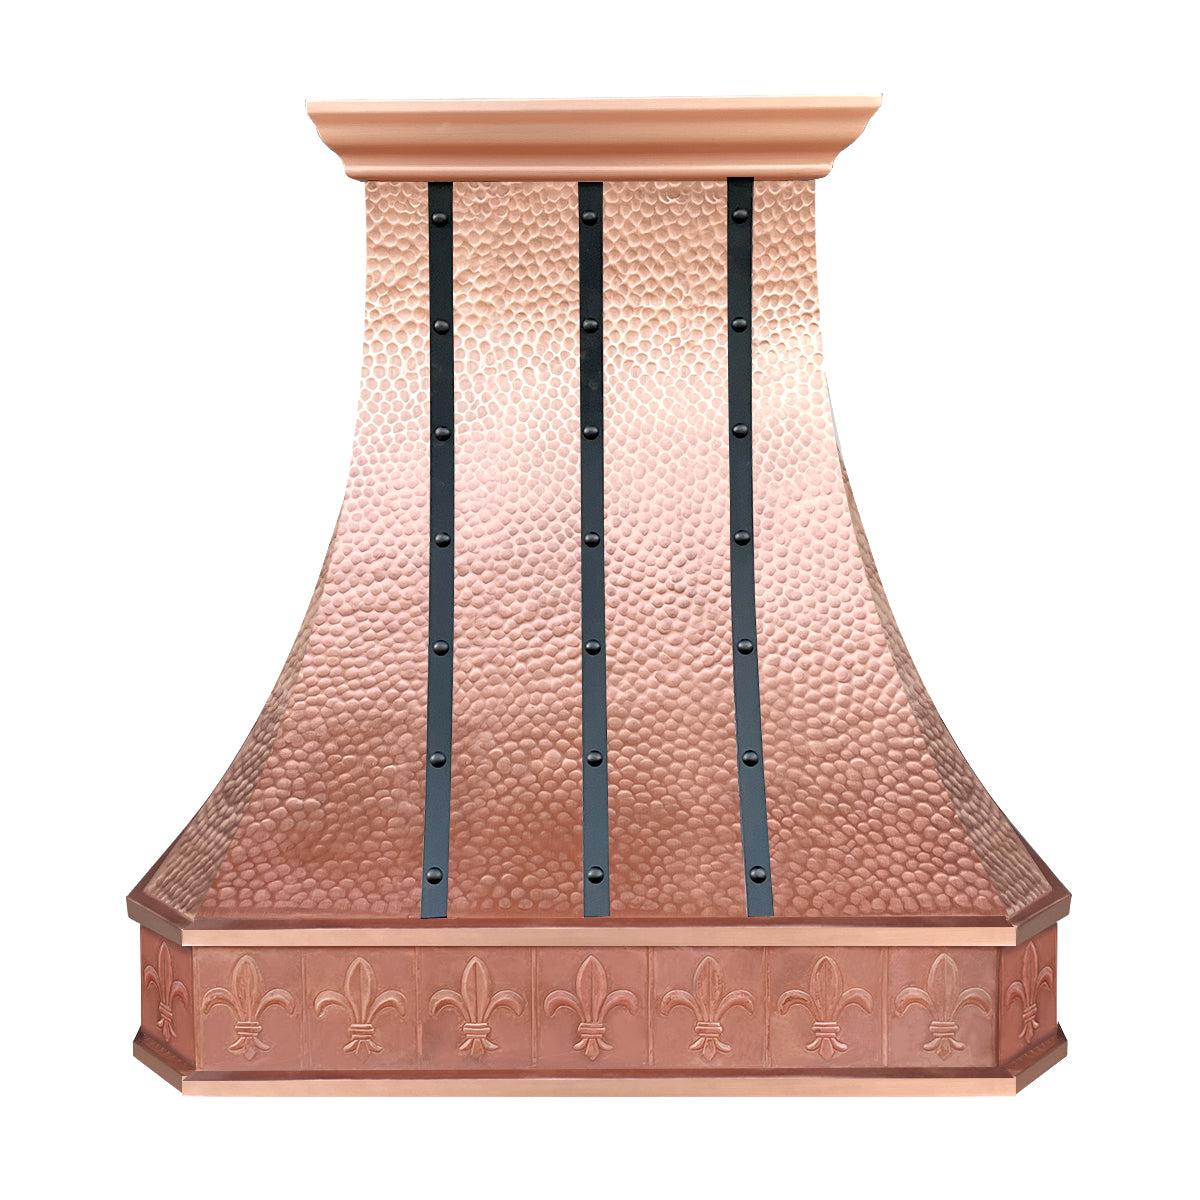 Fobest Instock Island Copper Range Hood FCP-69 (36"W x 27"D x 37"H), Four Colors to Choose - Fobest Appliance